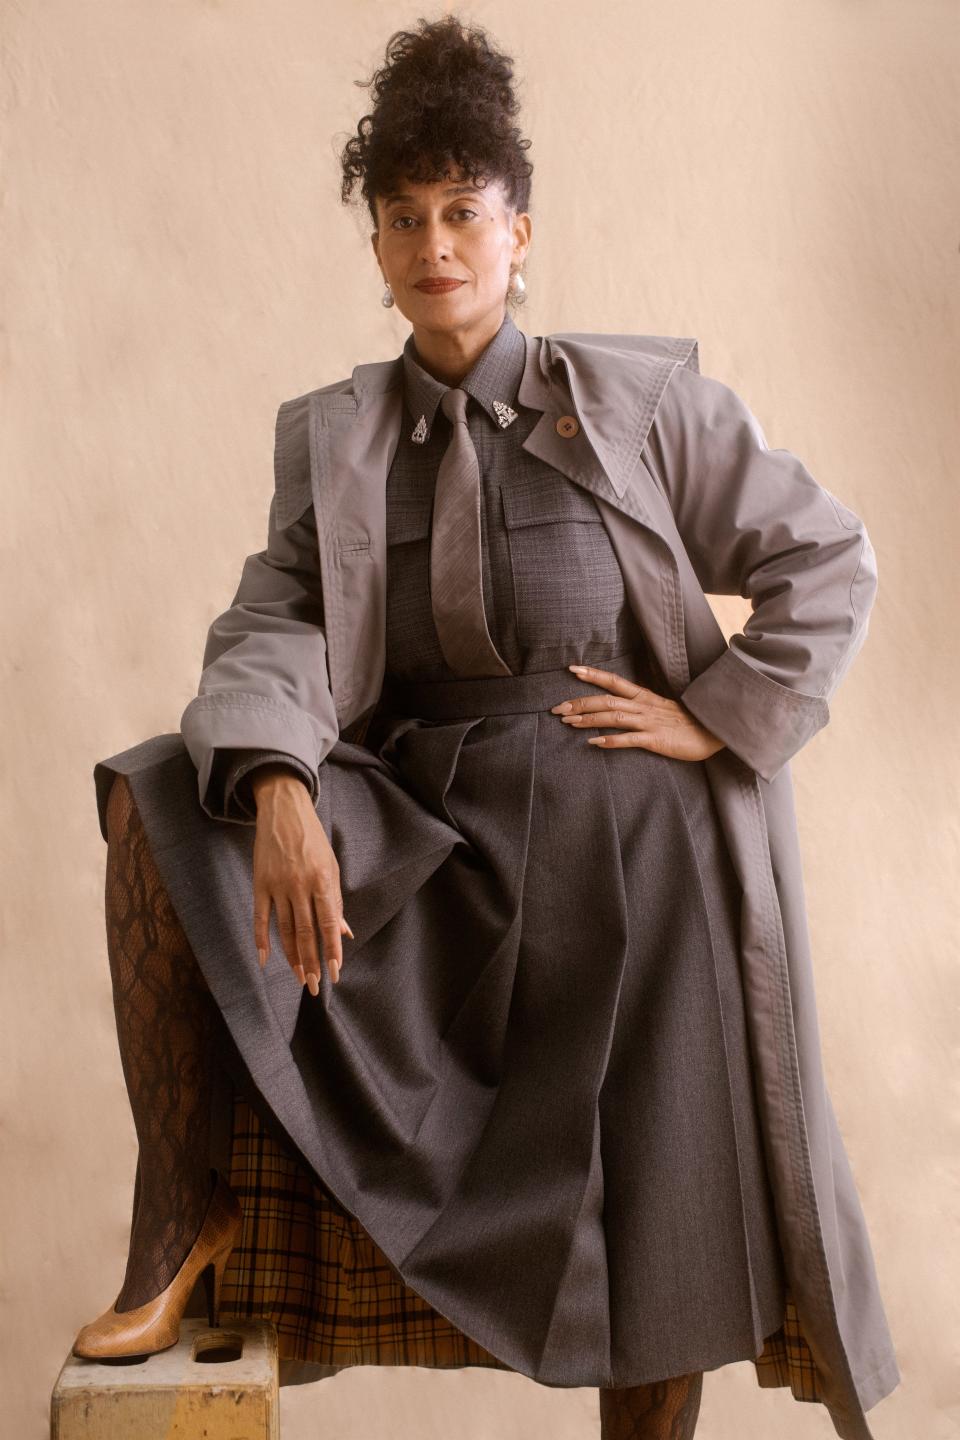 <cite class="credit">Gucci trench coat. Stella McCartney men's top. Gucci tie. Gucci skirt. Falke tights. Gucci shoes. Mateo pearl earrings.</cite>